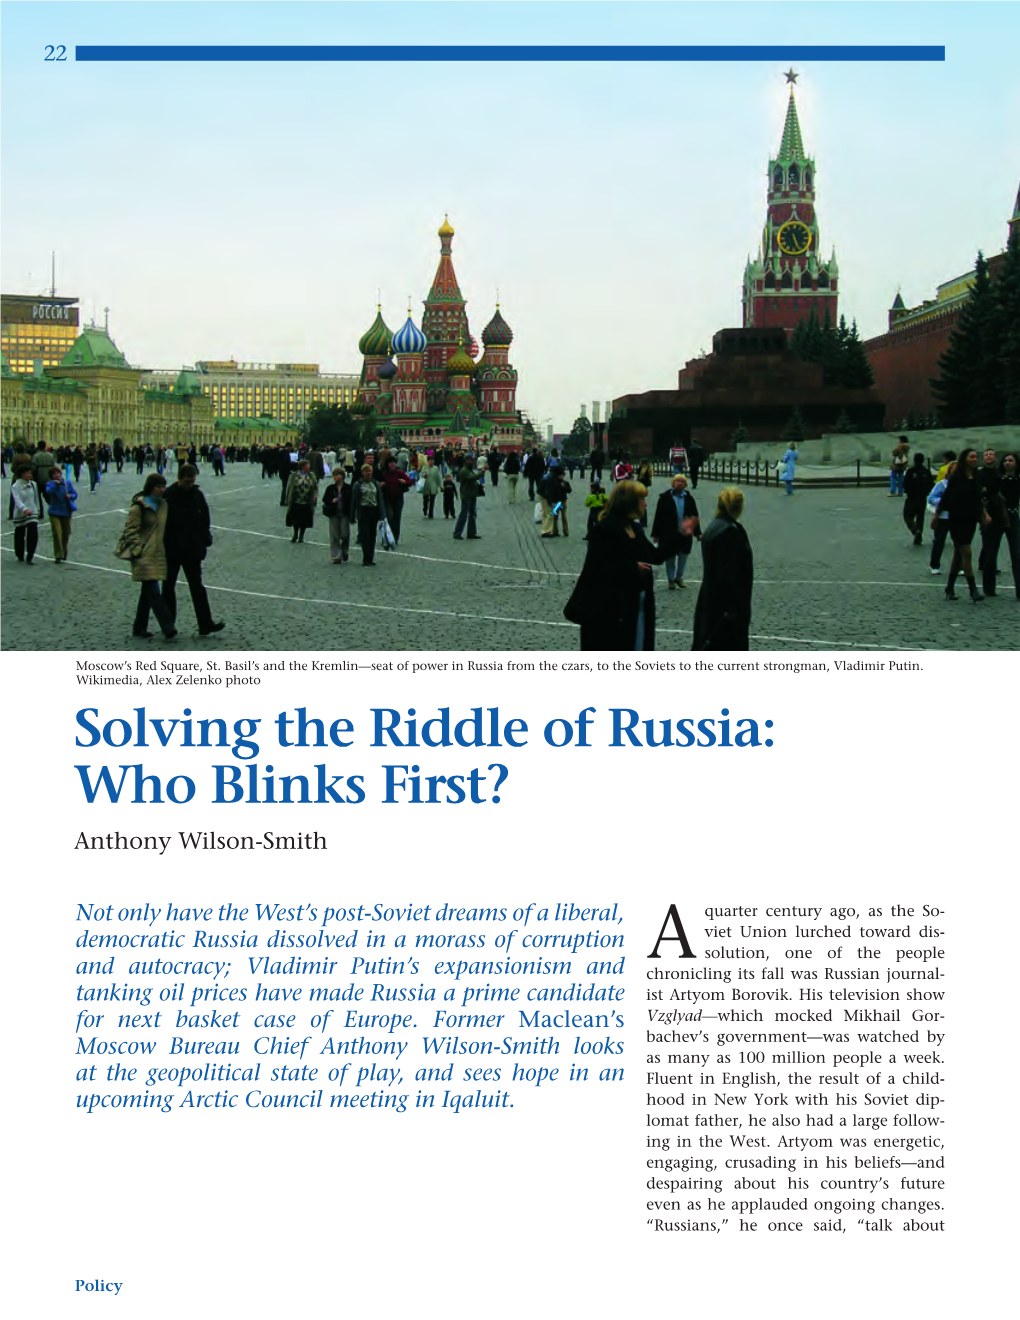 Solving the Riddle of Russia: Who Blinks First? Anthony Wilson-Smith